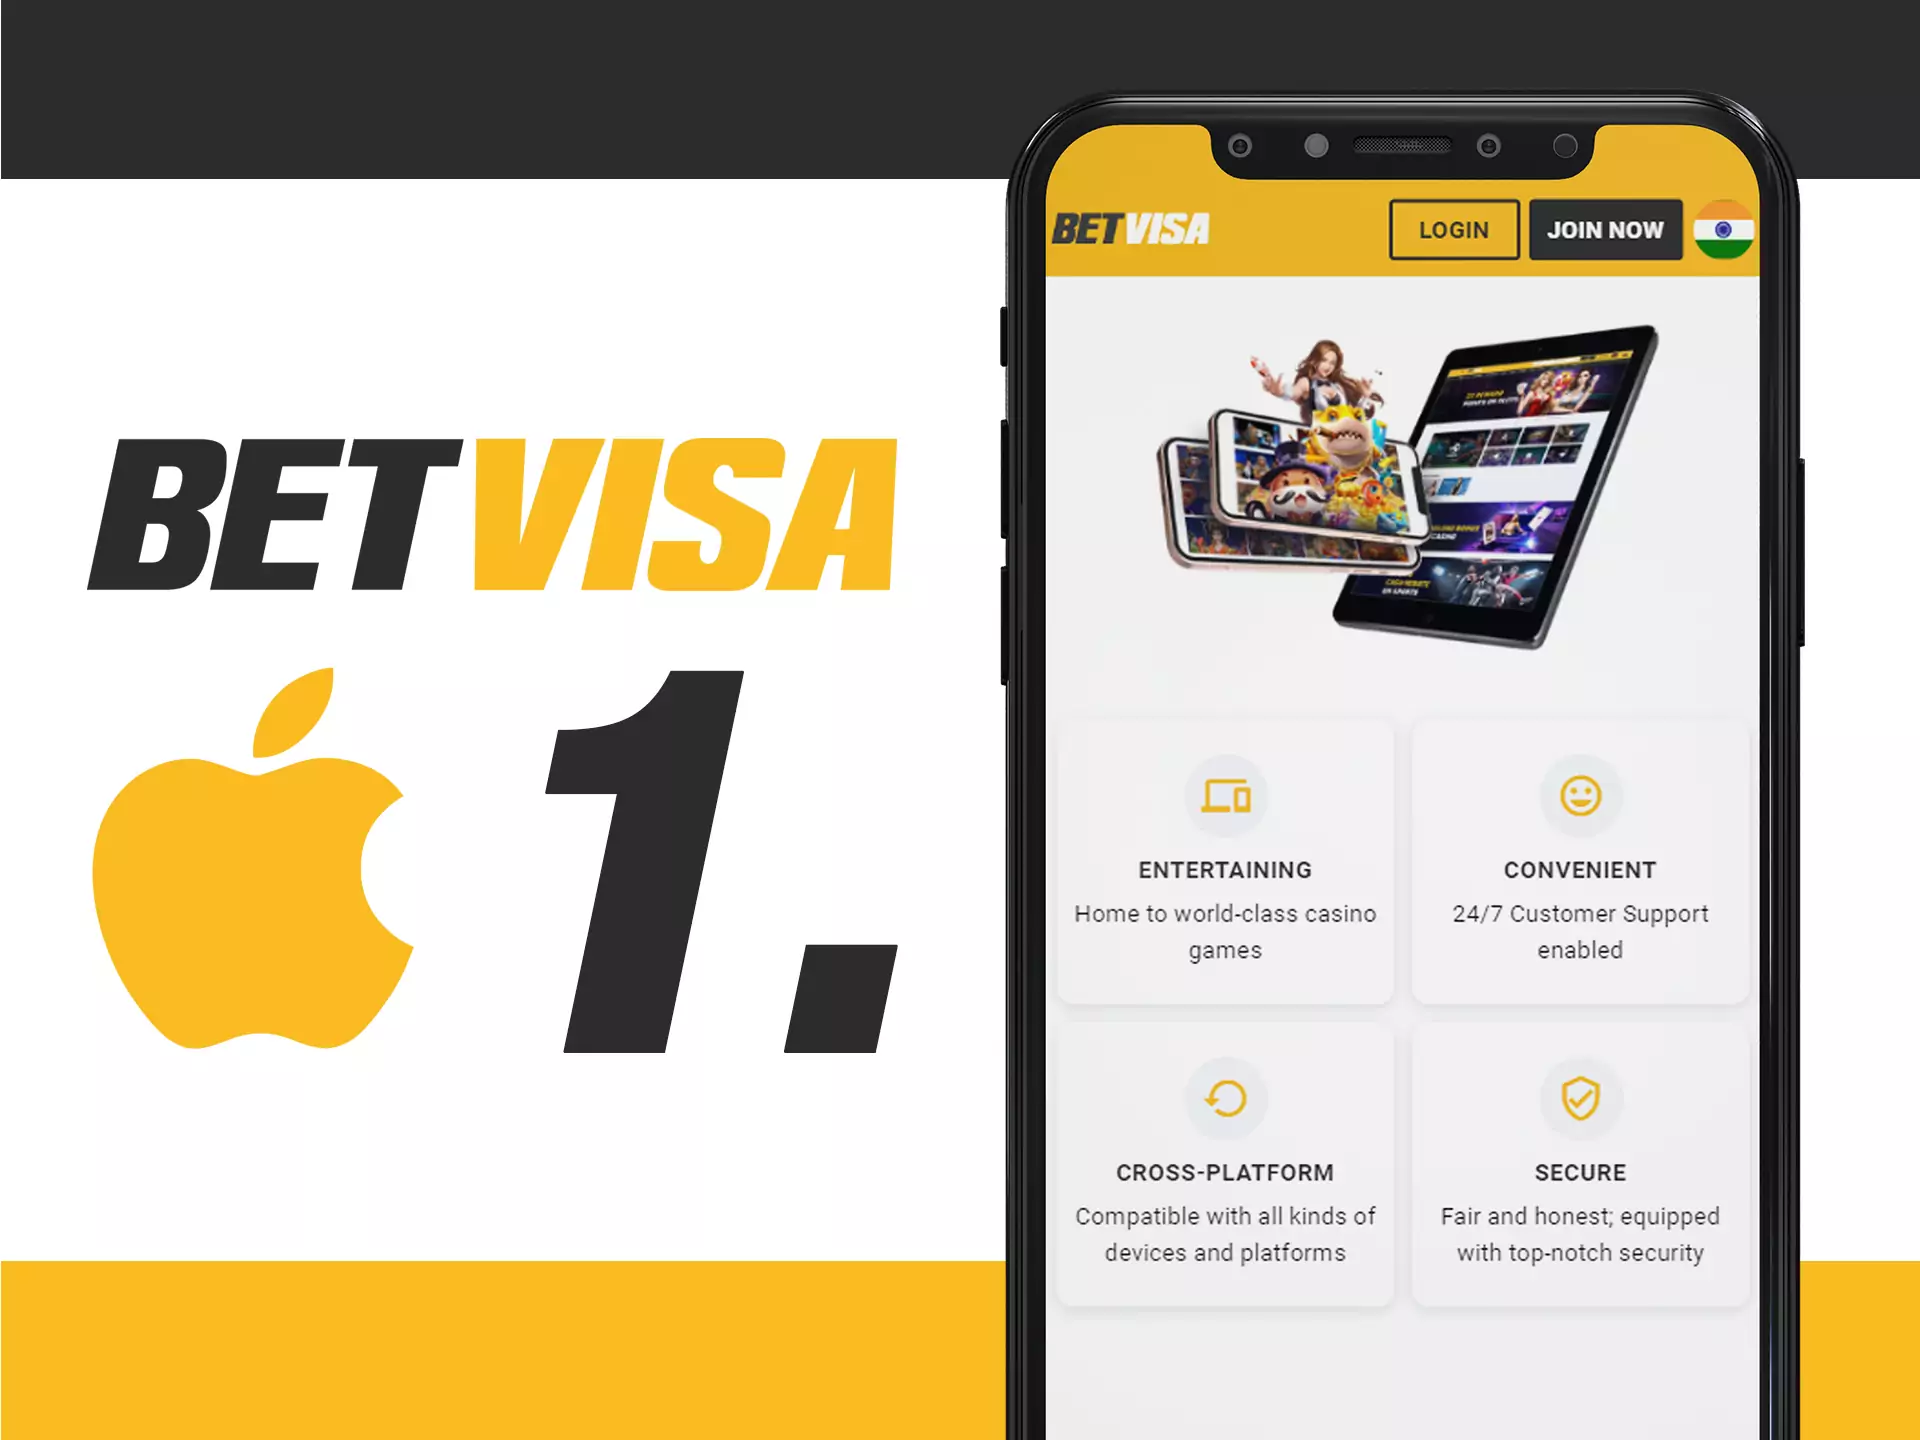 Enter the Betvisa main page using your iOS device.